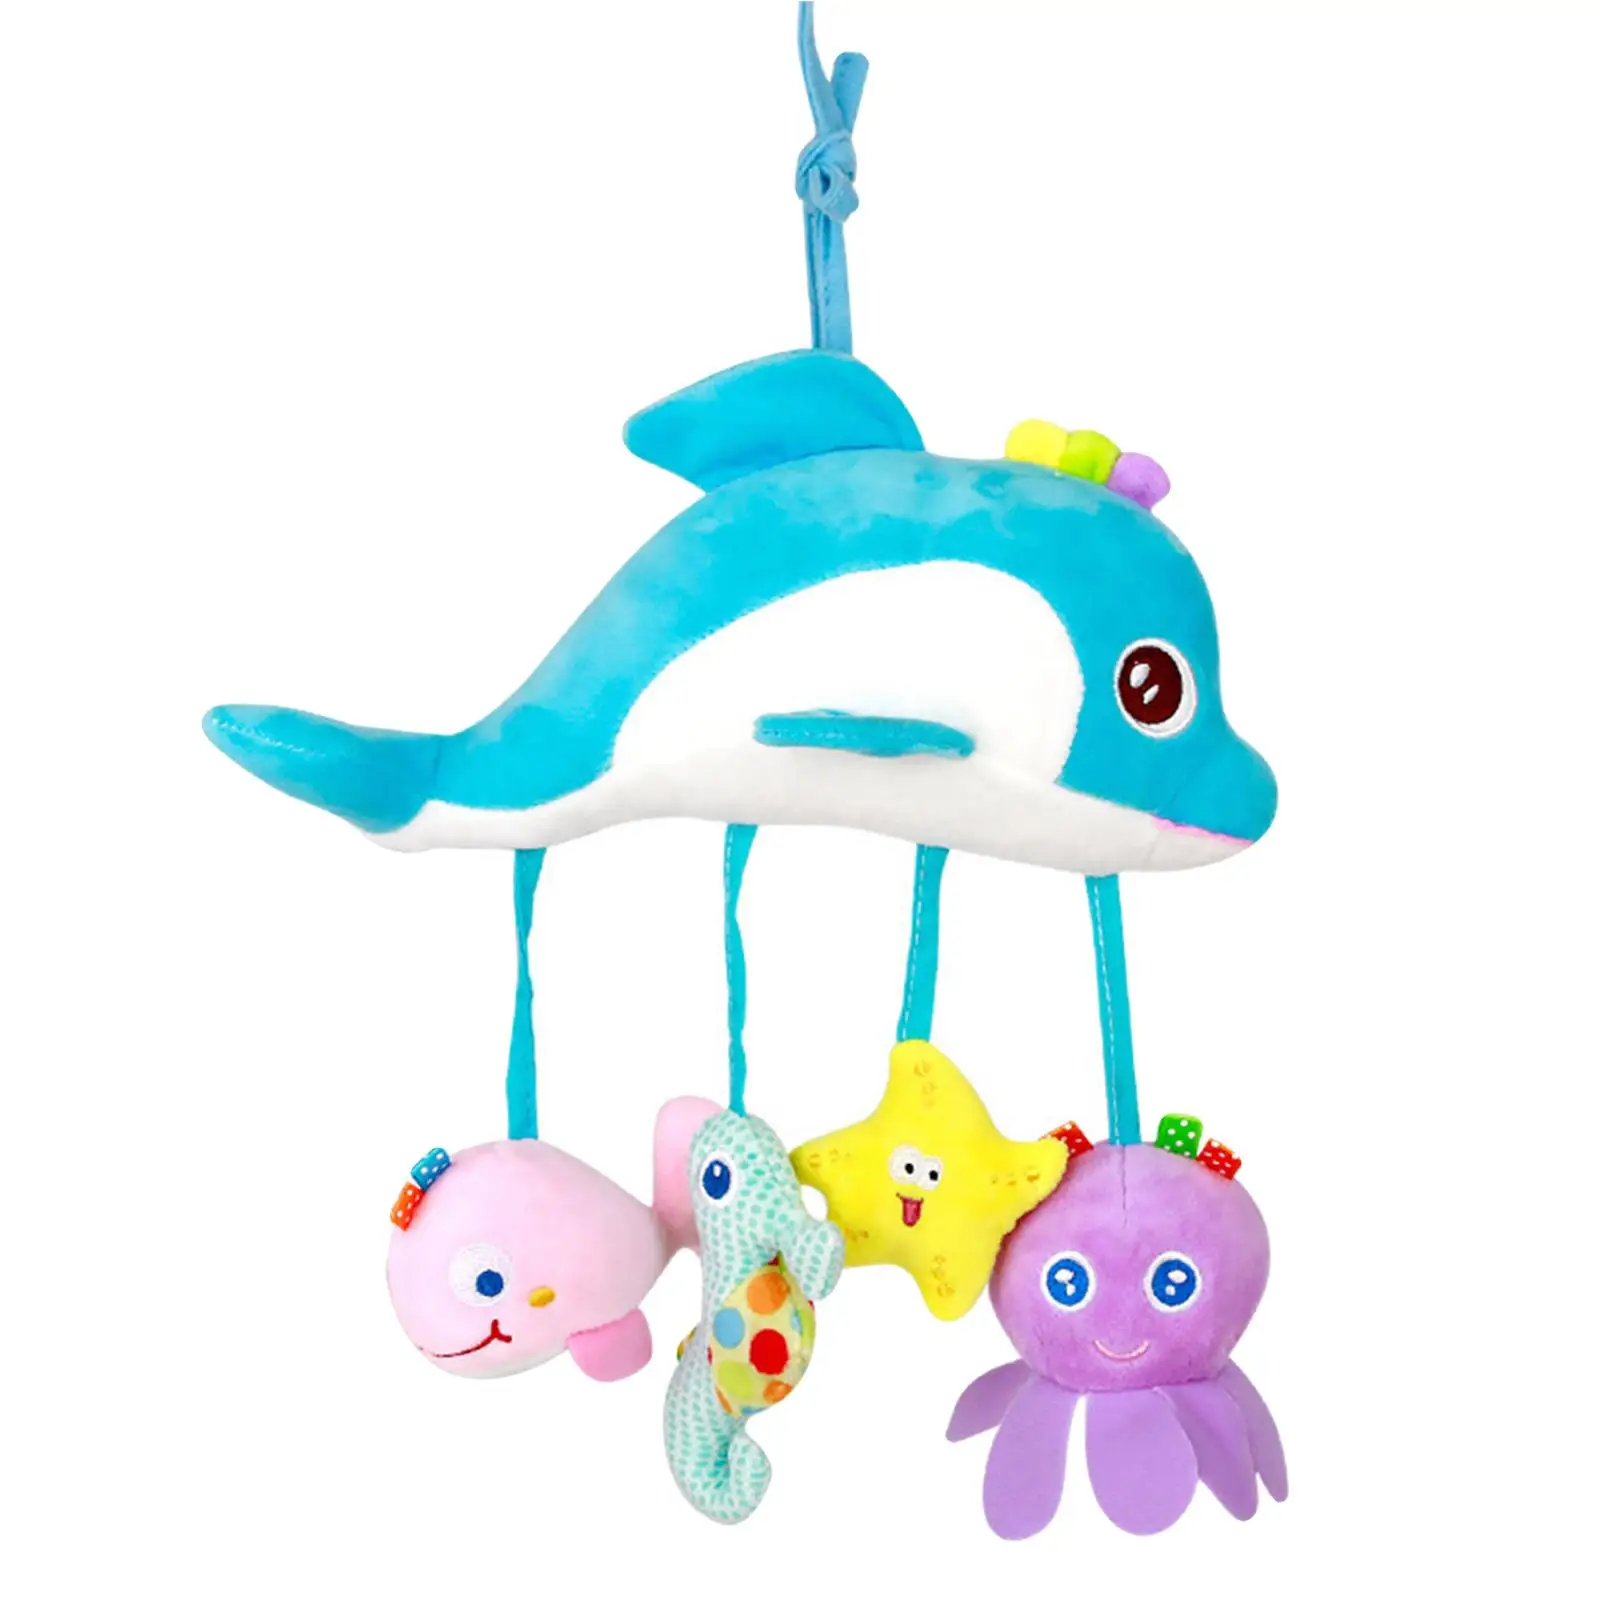 Animal Hanging Mobile Toys for Babies with Sound Stuffed Infant Toys Animal Rattles Plush Toy Baby Kids Rattle Toys